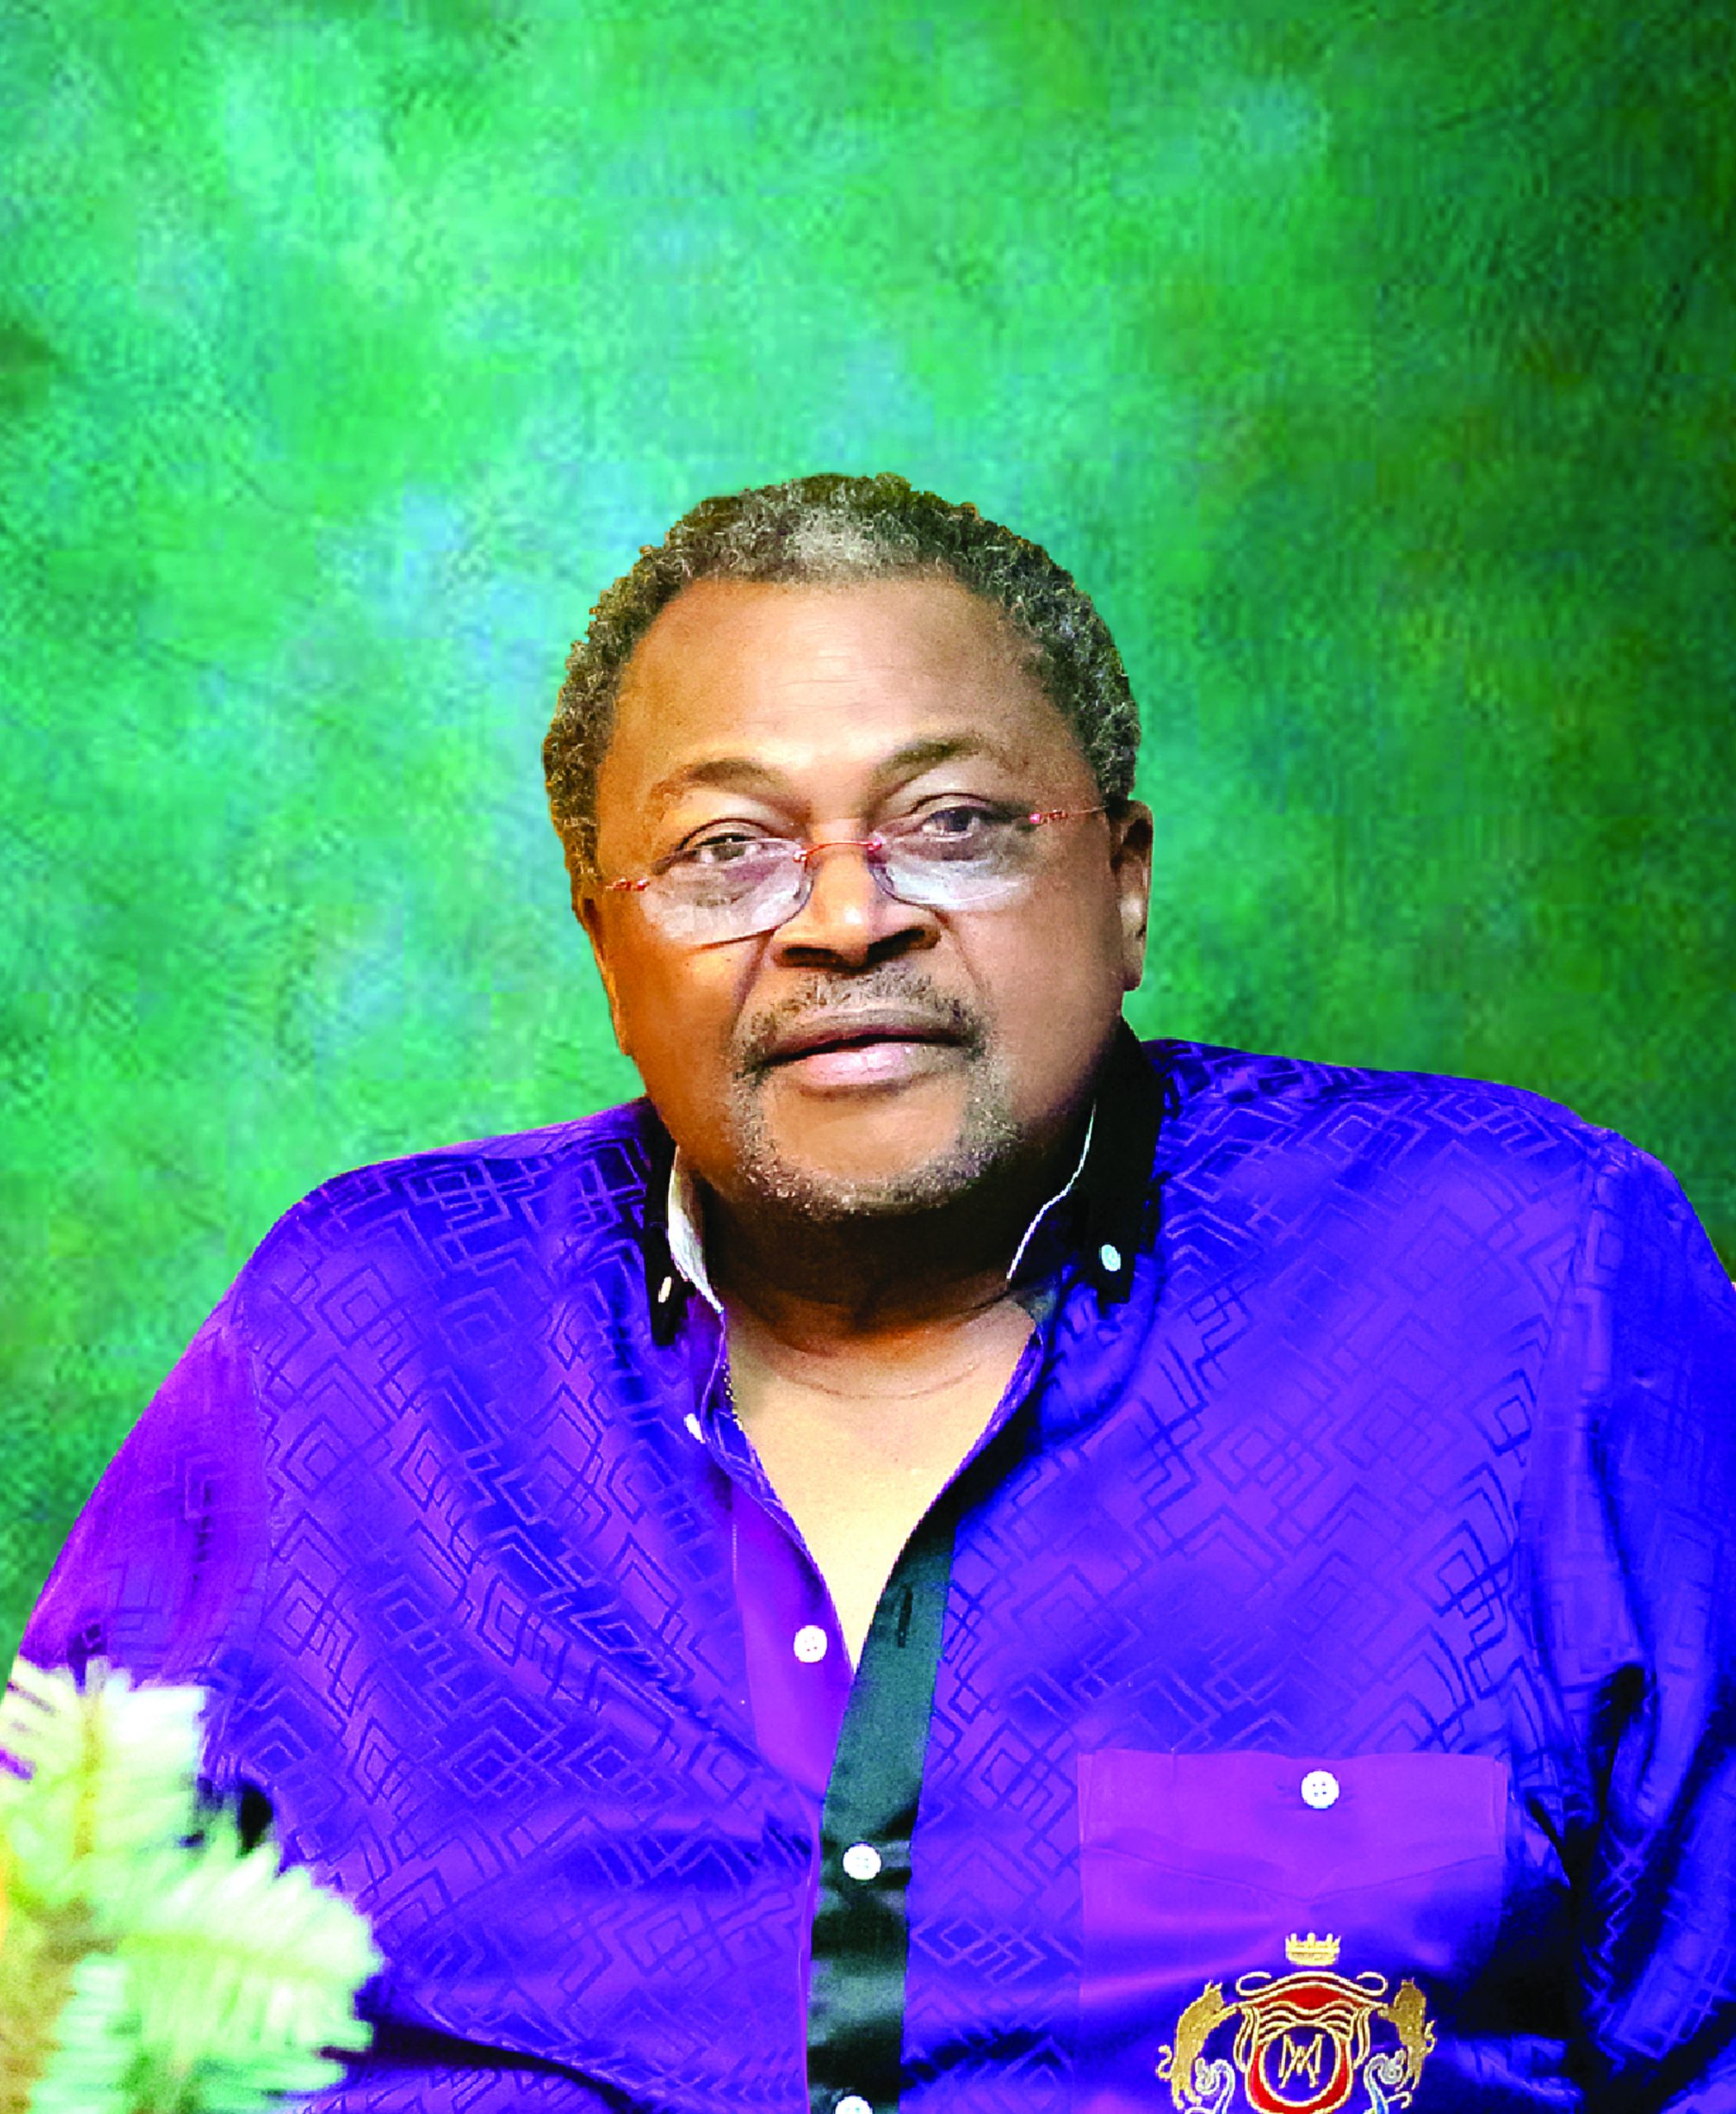 MIKE ADENUGA AT 70 A BOOK TO INSPIRE OUR YOUTHS